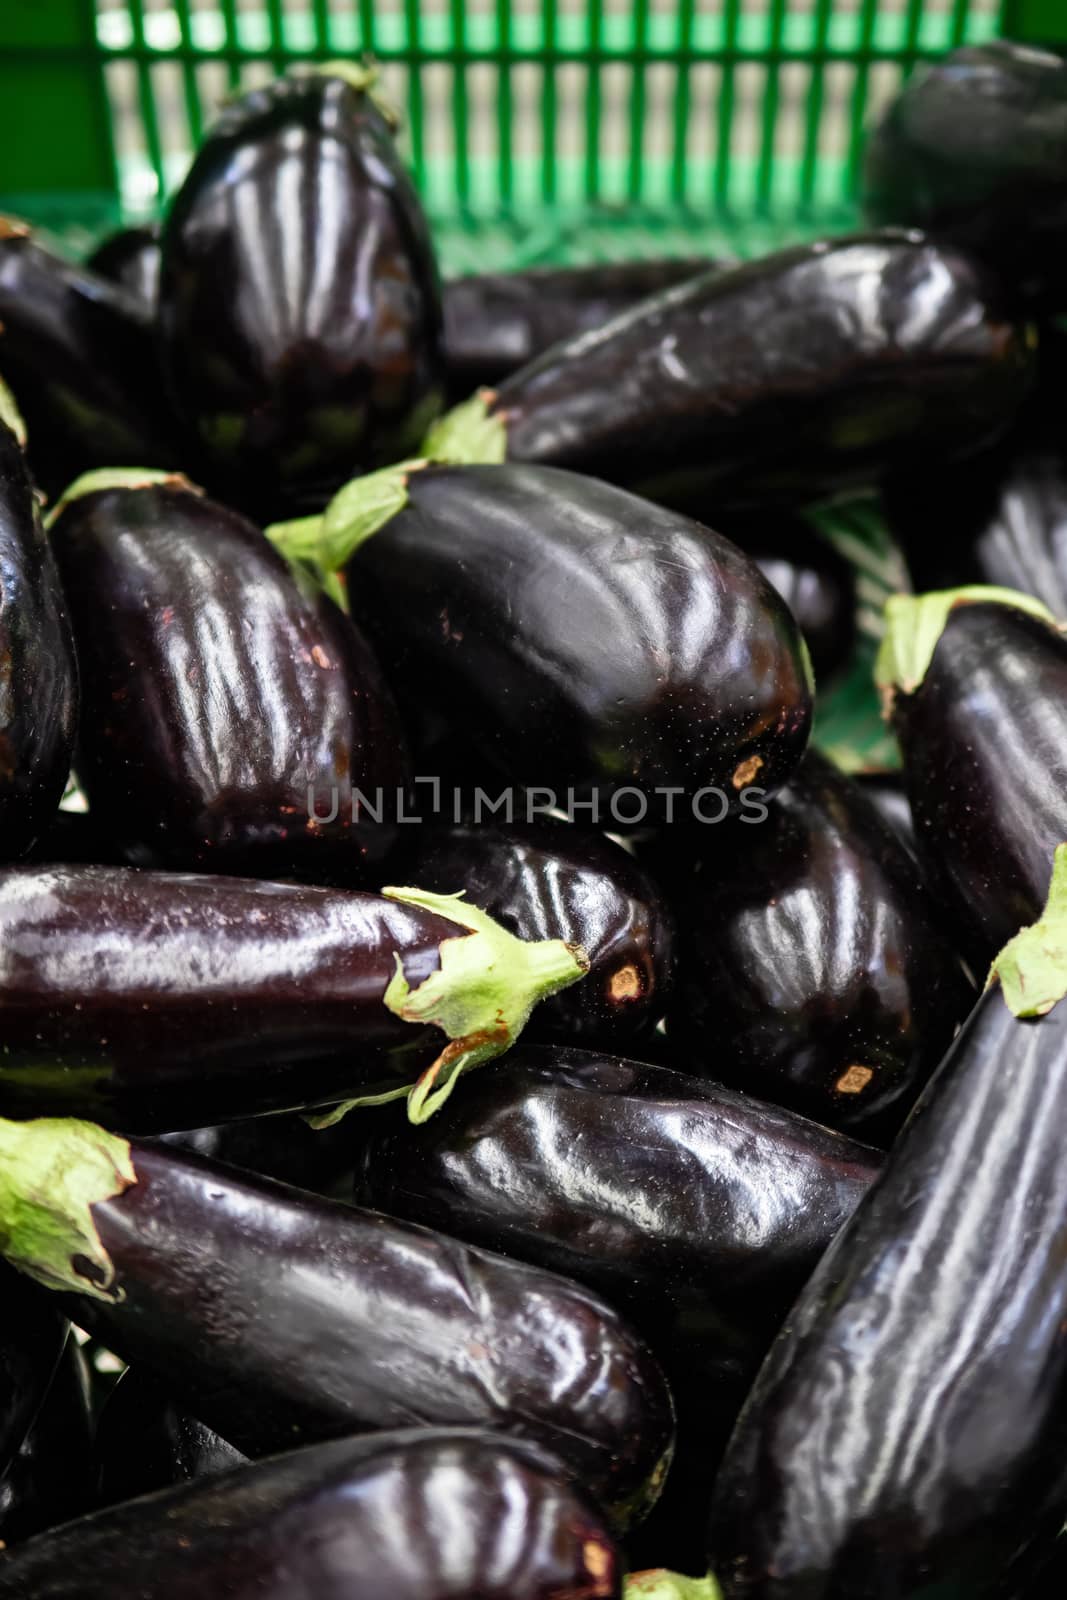 Eggplants lined up at the grocery store. Close up view.